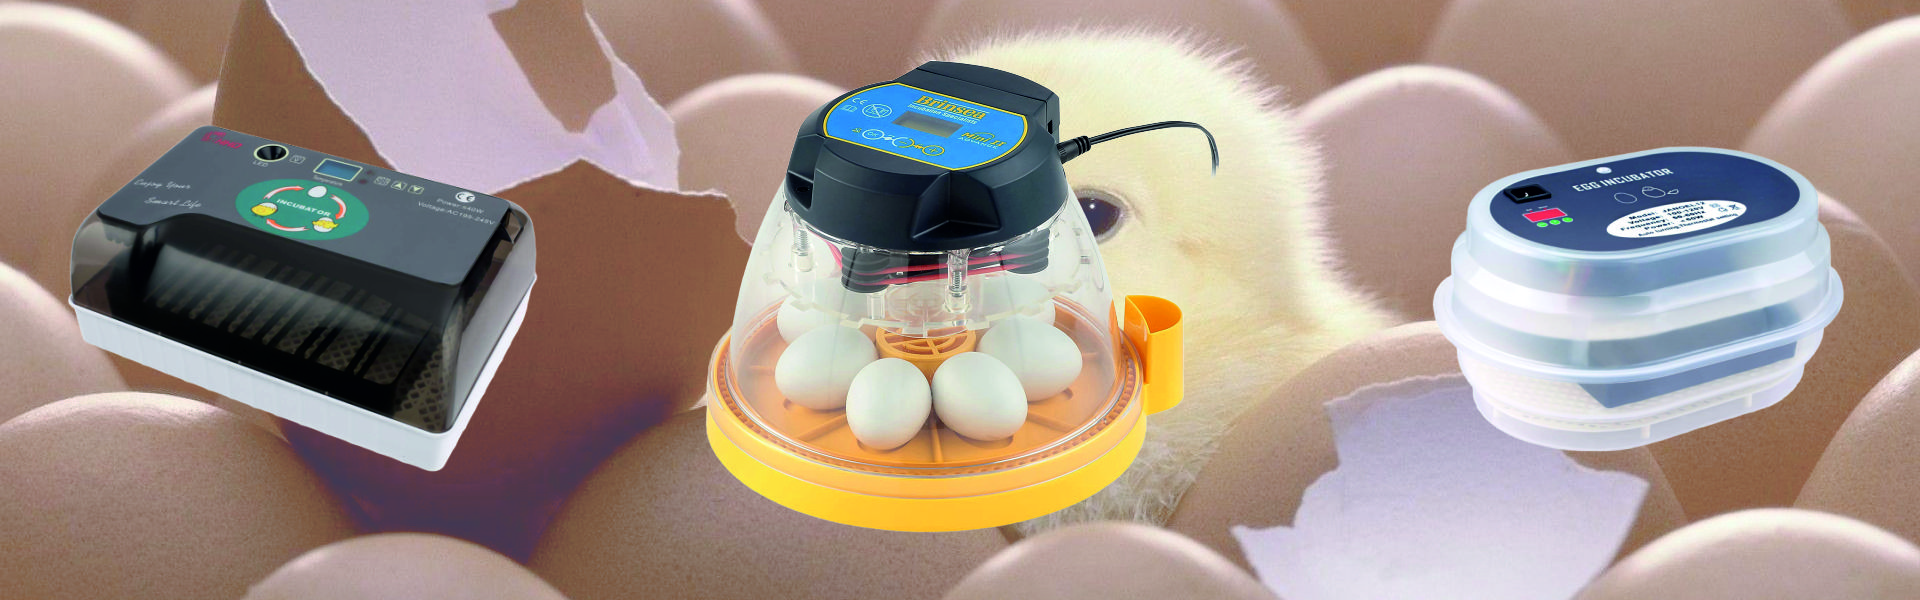 5 Best Egg Incubators for Hatching Chickens, Ducks or Some Exotic Birds